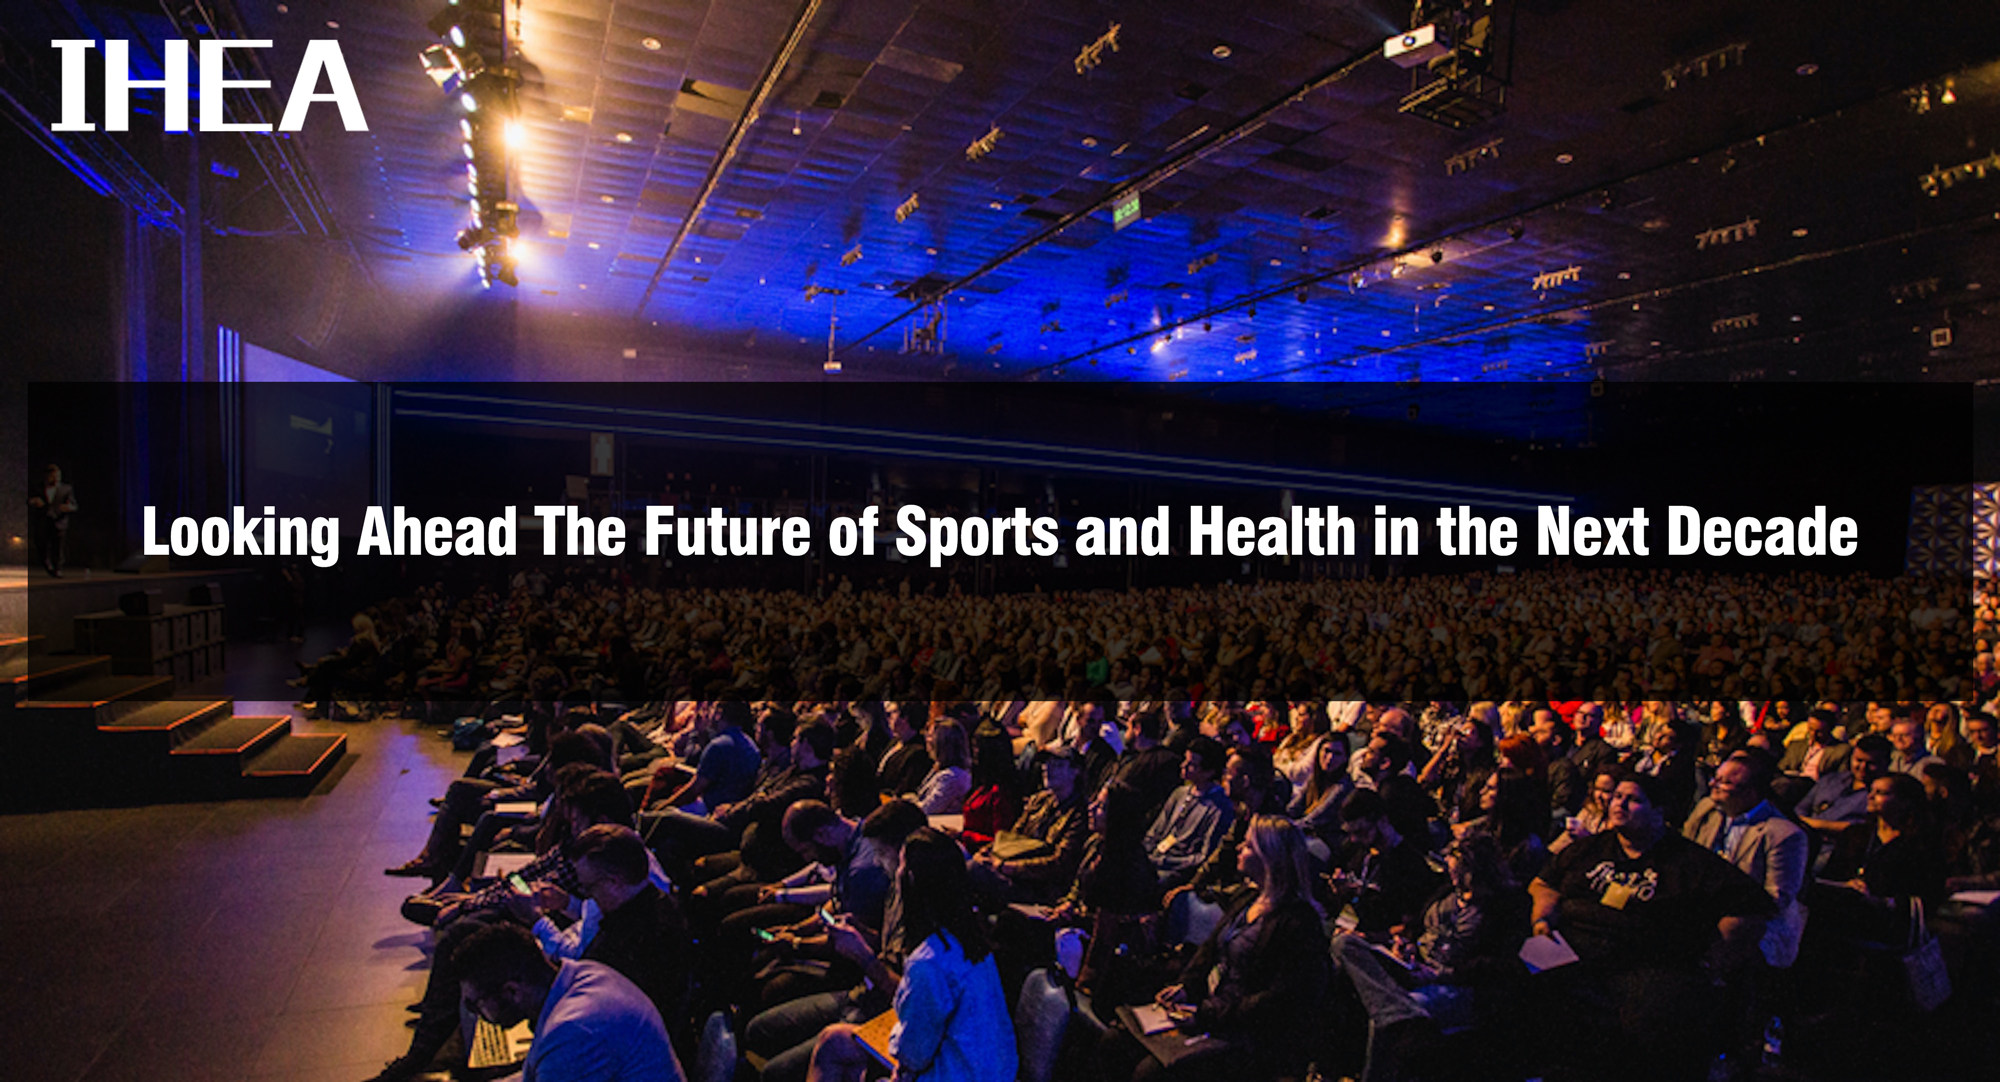 Looking Ahead The Future of Sports and Health in the Next Decade - IHEA Conference in Texas